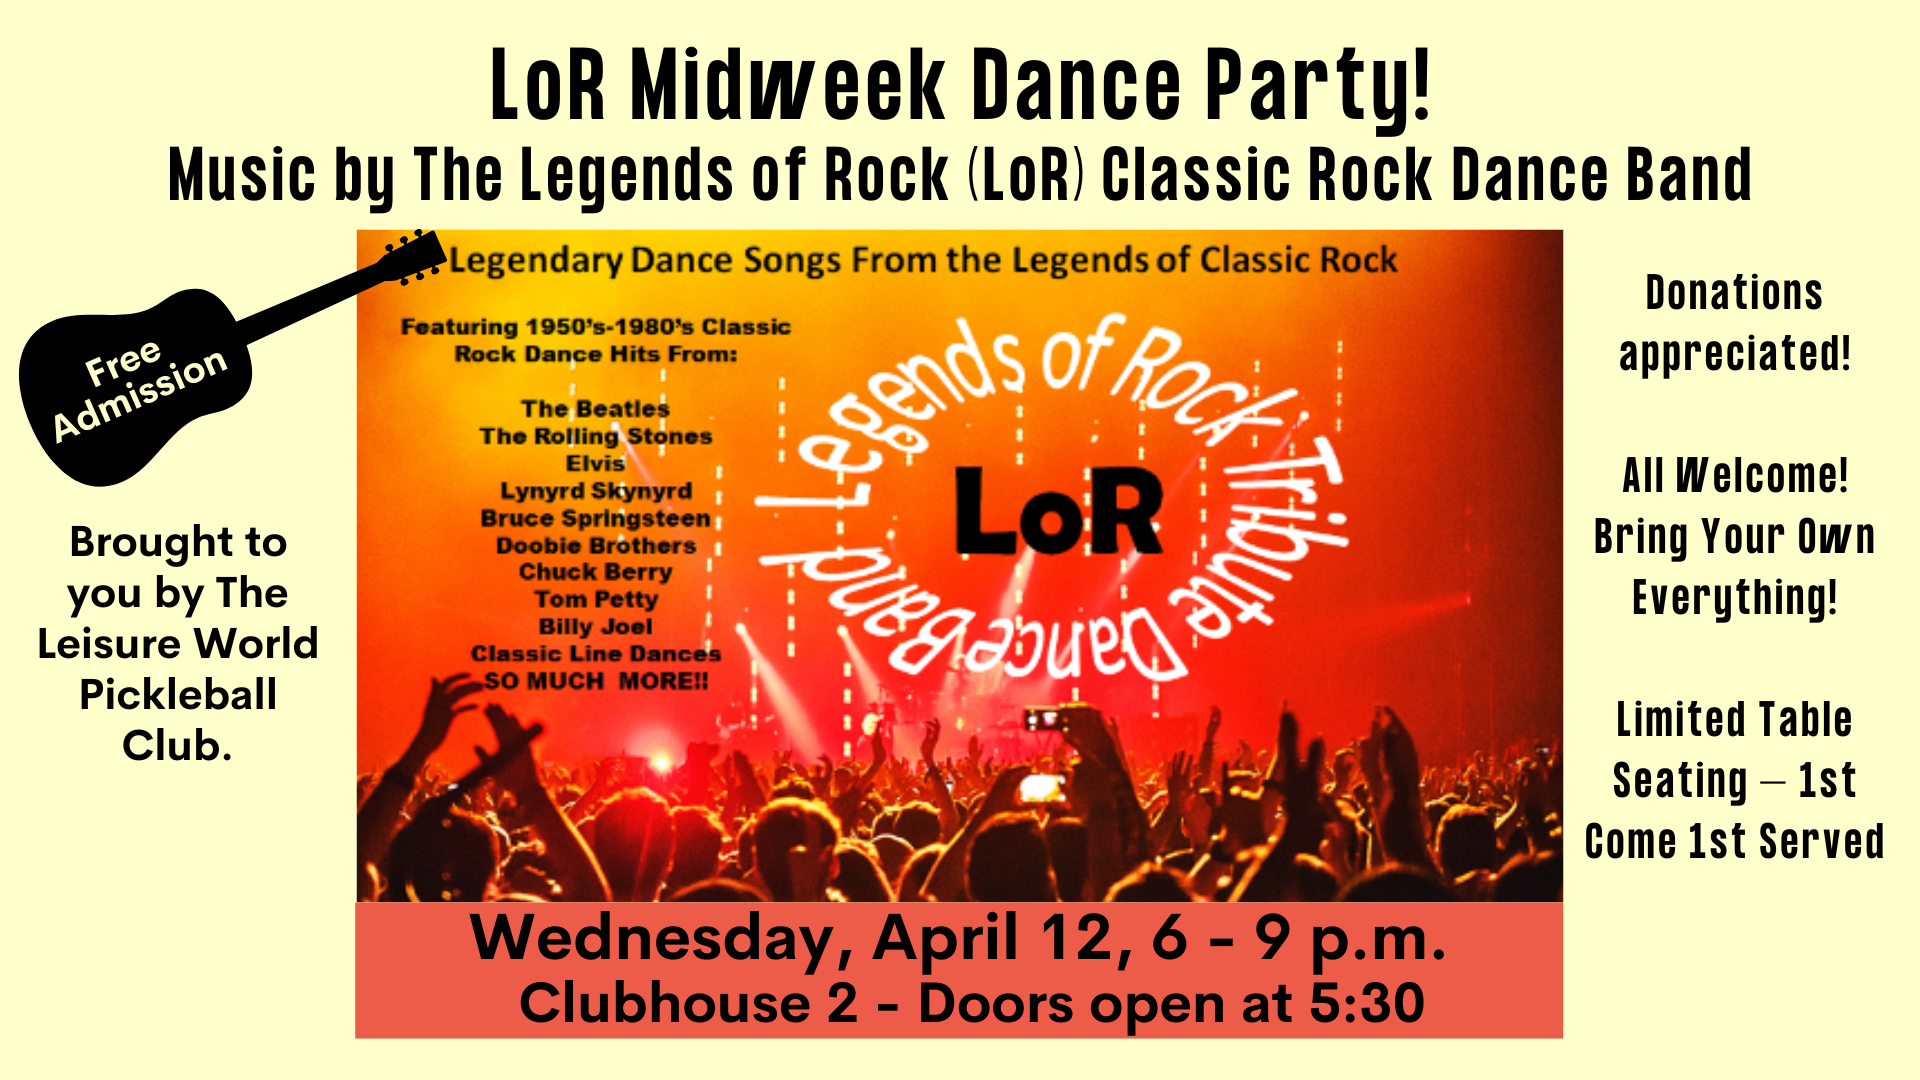 LoR Midweek Dance Party